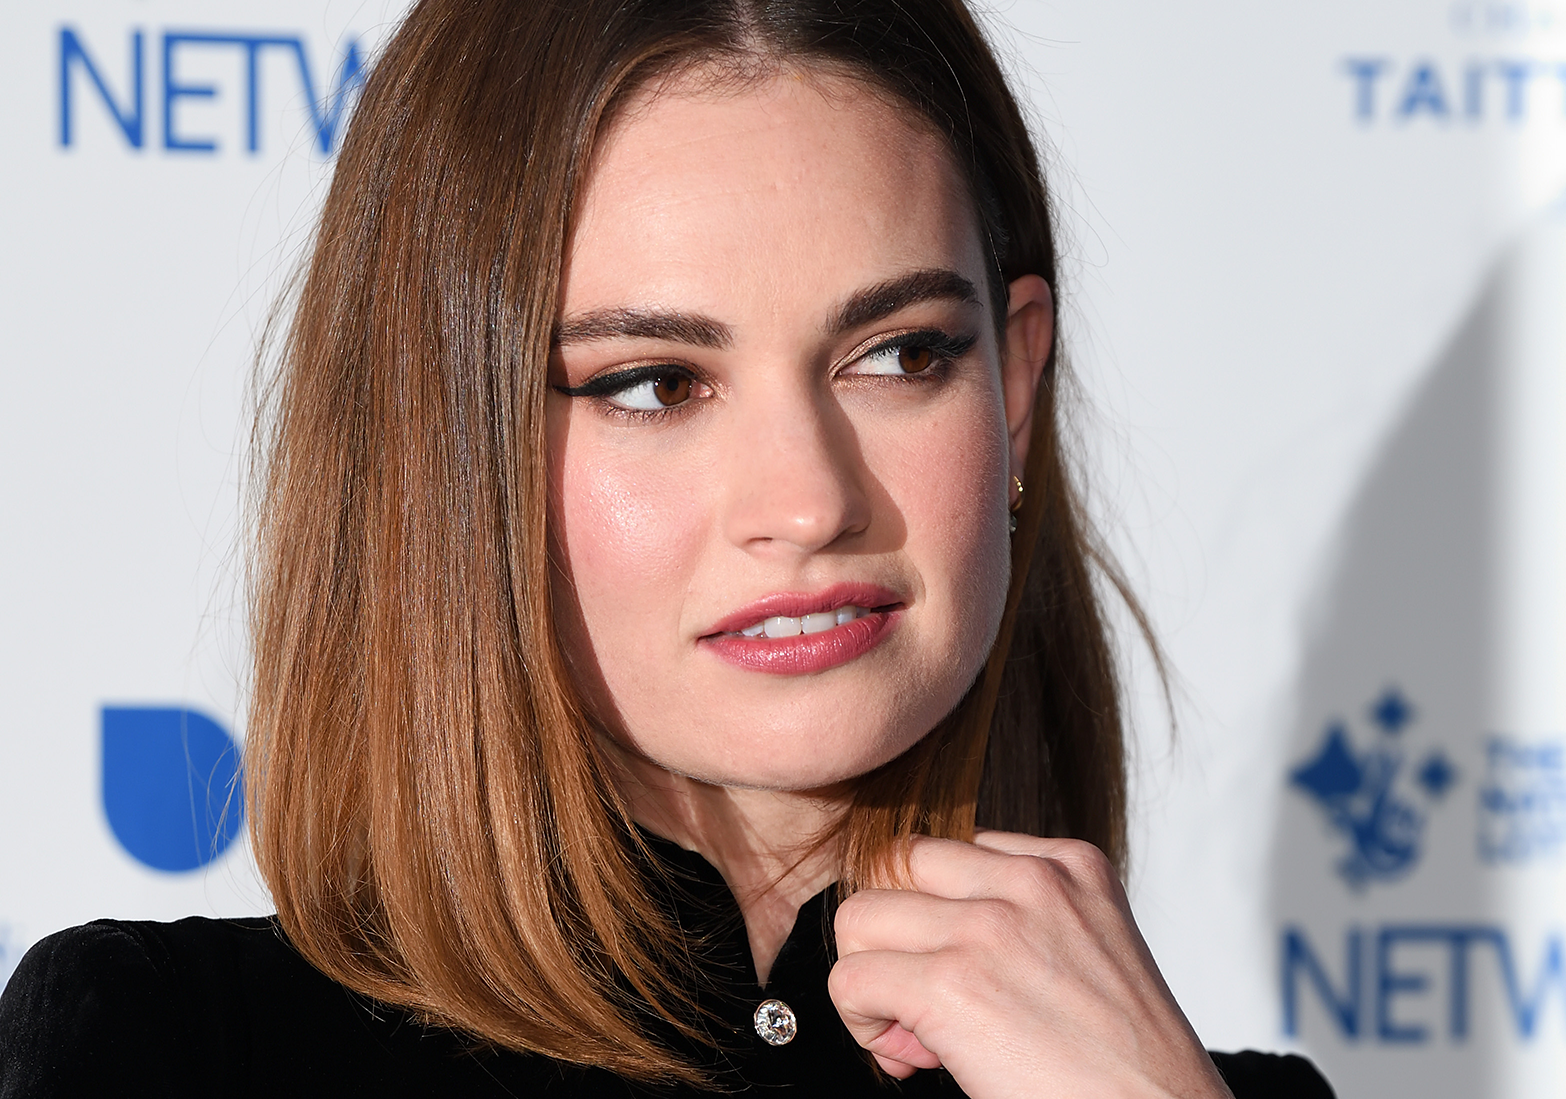 Lily James just shut it down in an insane cut-out dress